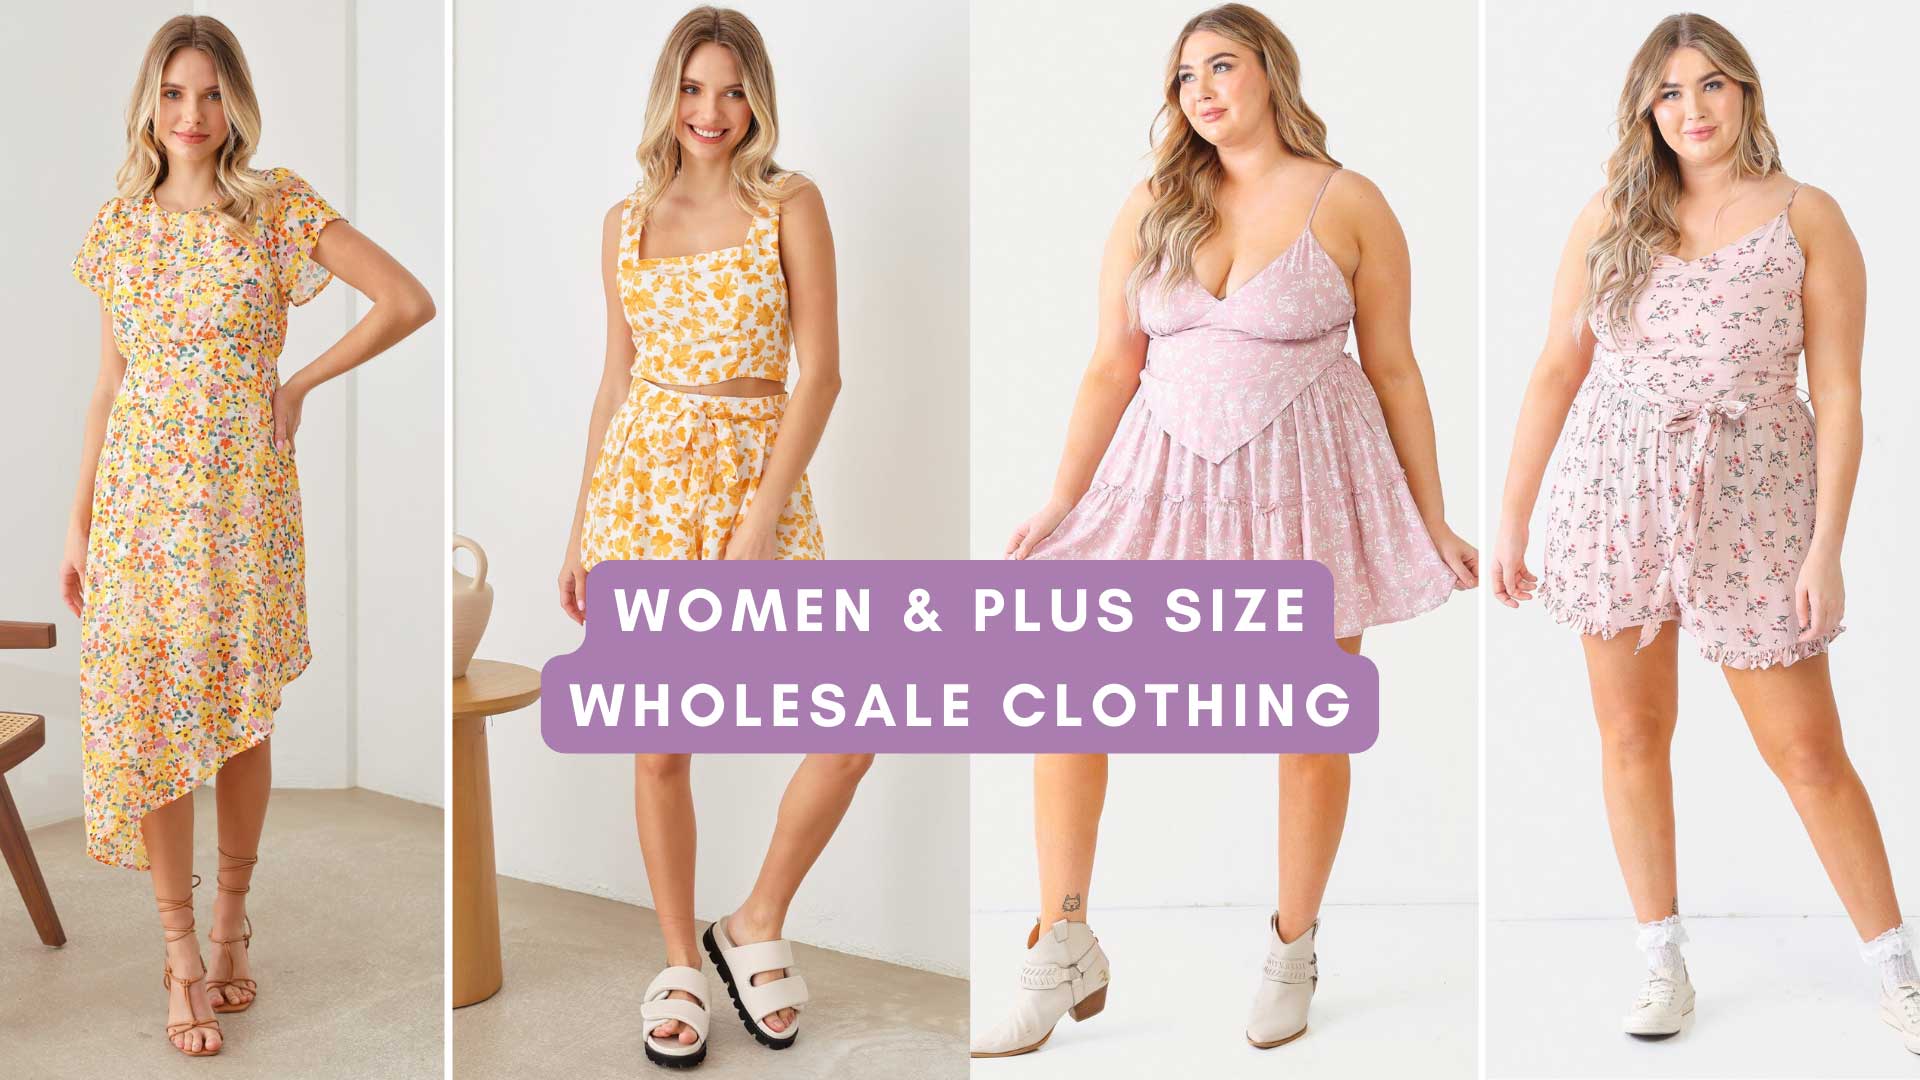 Tips for Choosing the Right Wholesale Clothing